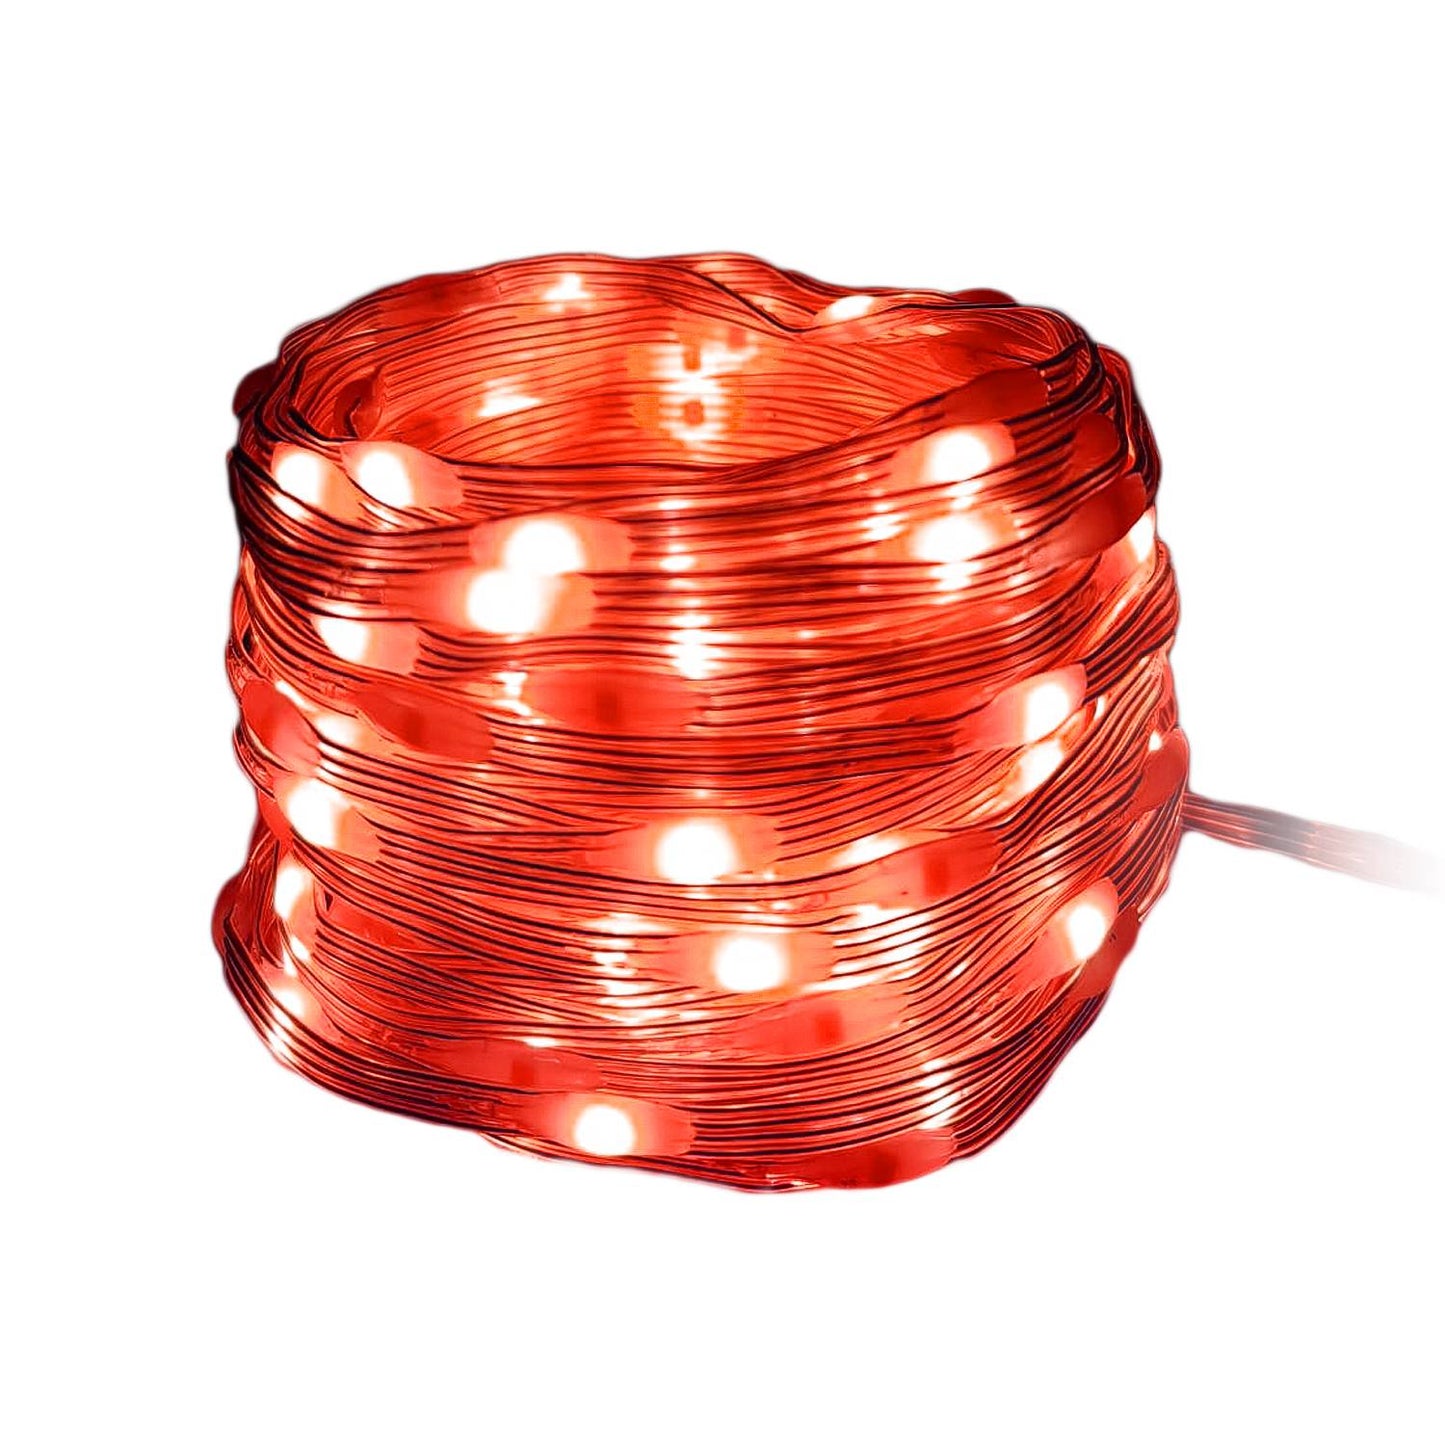 Decoled Outdoor String Lights 300 LED Red Light, LED Nano Bean IP44 Modular Christmas Lights, Waterproof Light Decorations, Transparent Cable